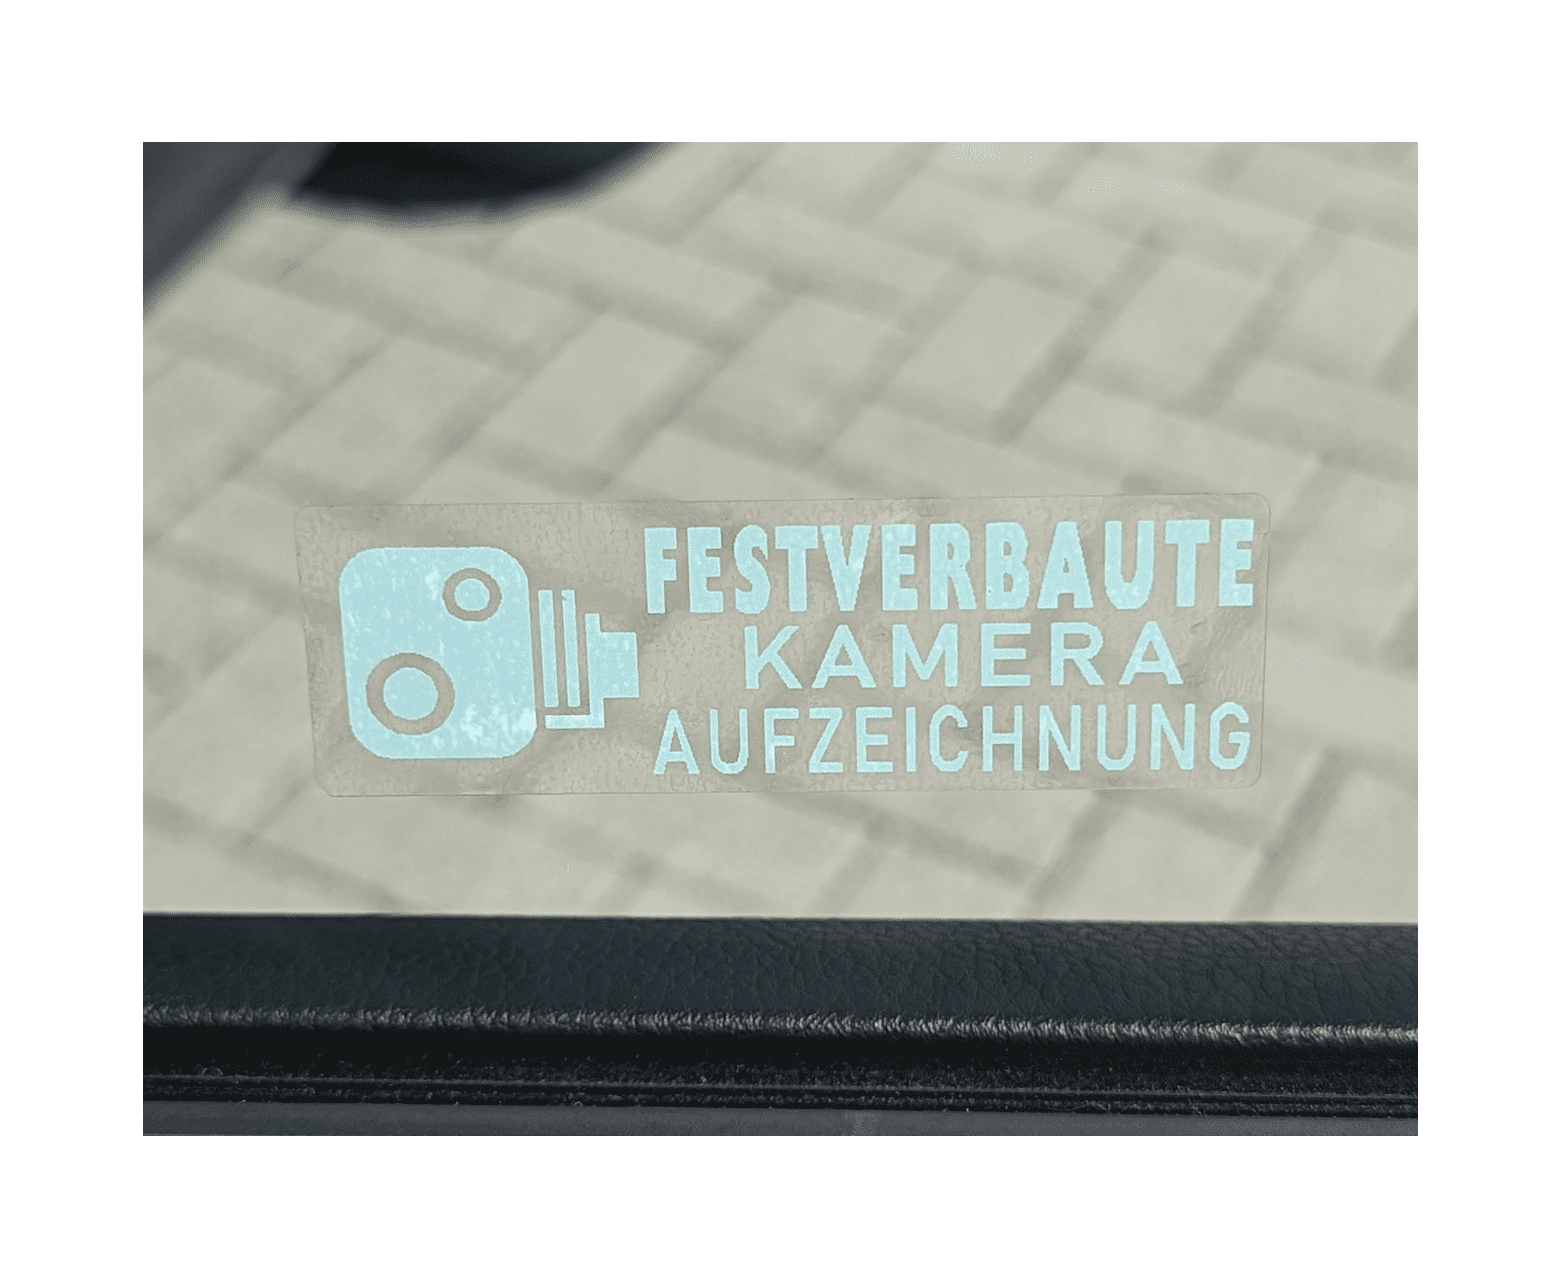 Car sticker variations (large and small)